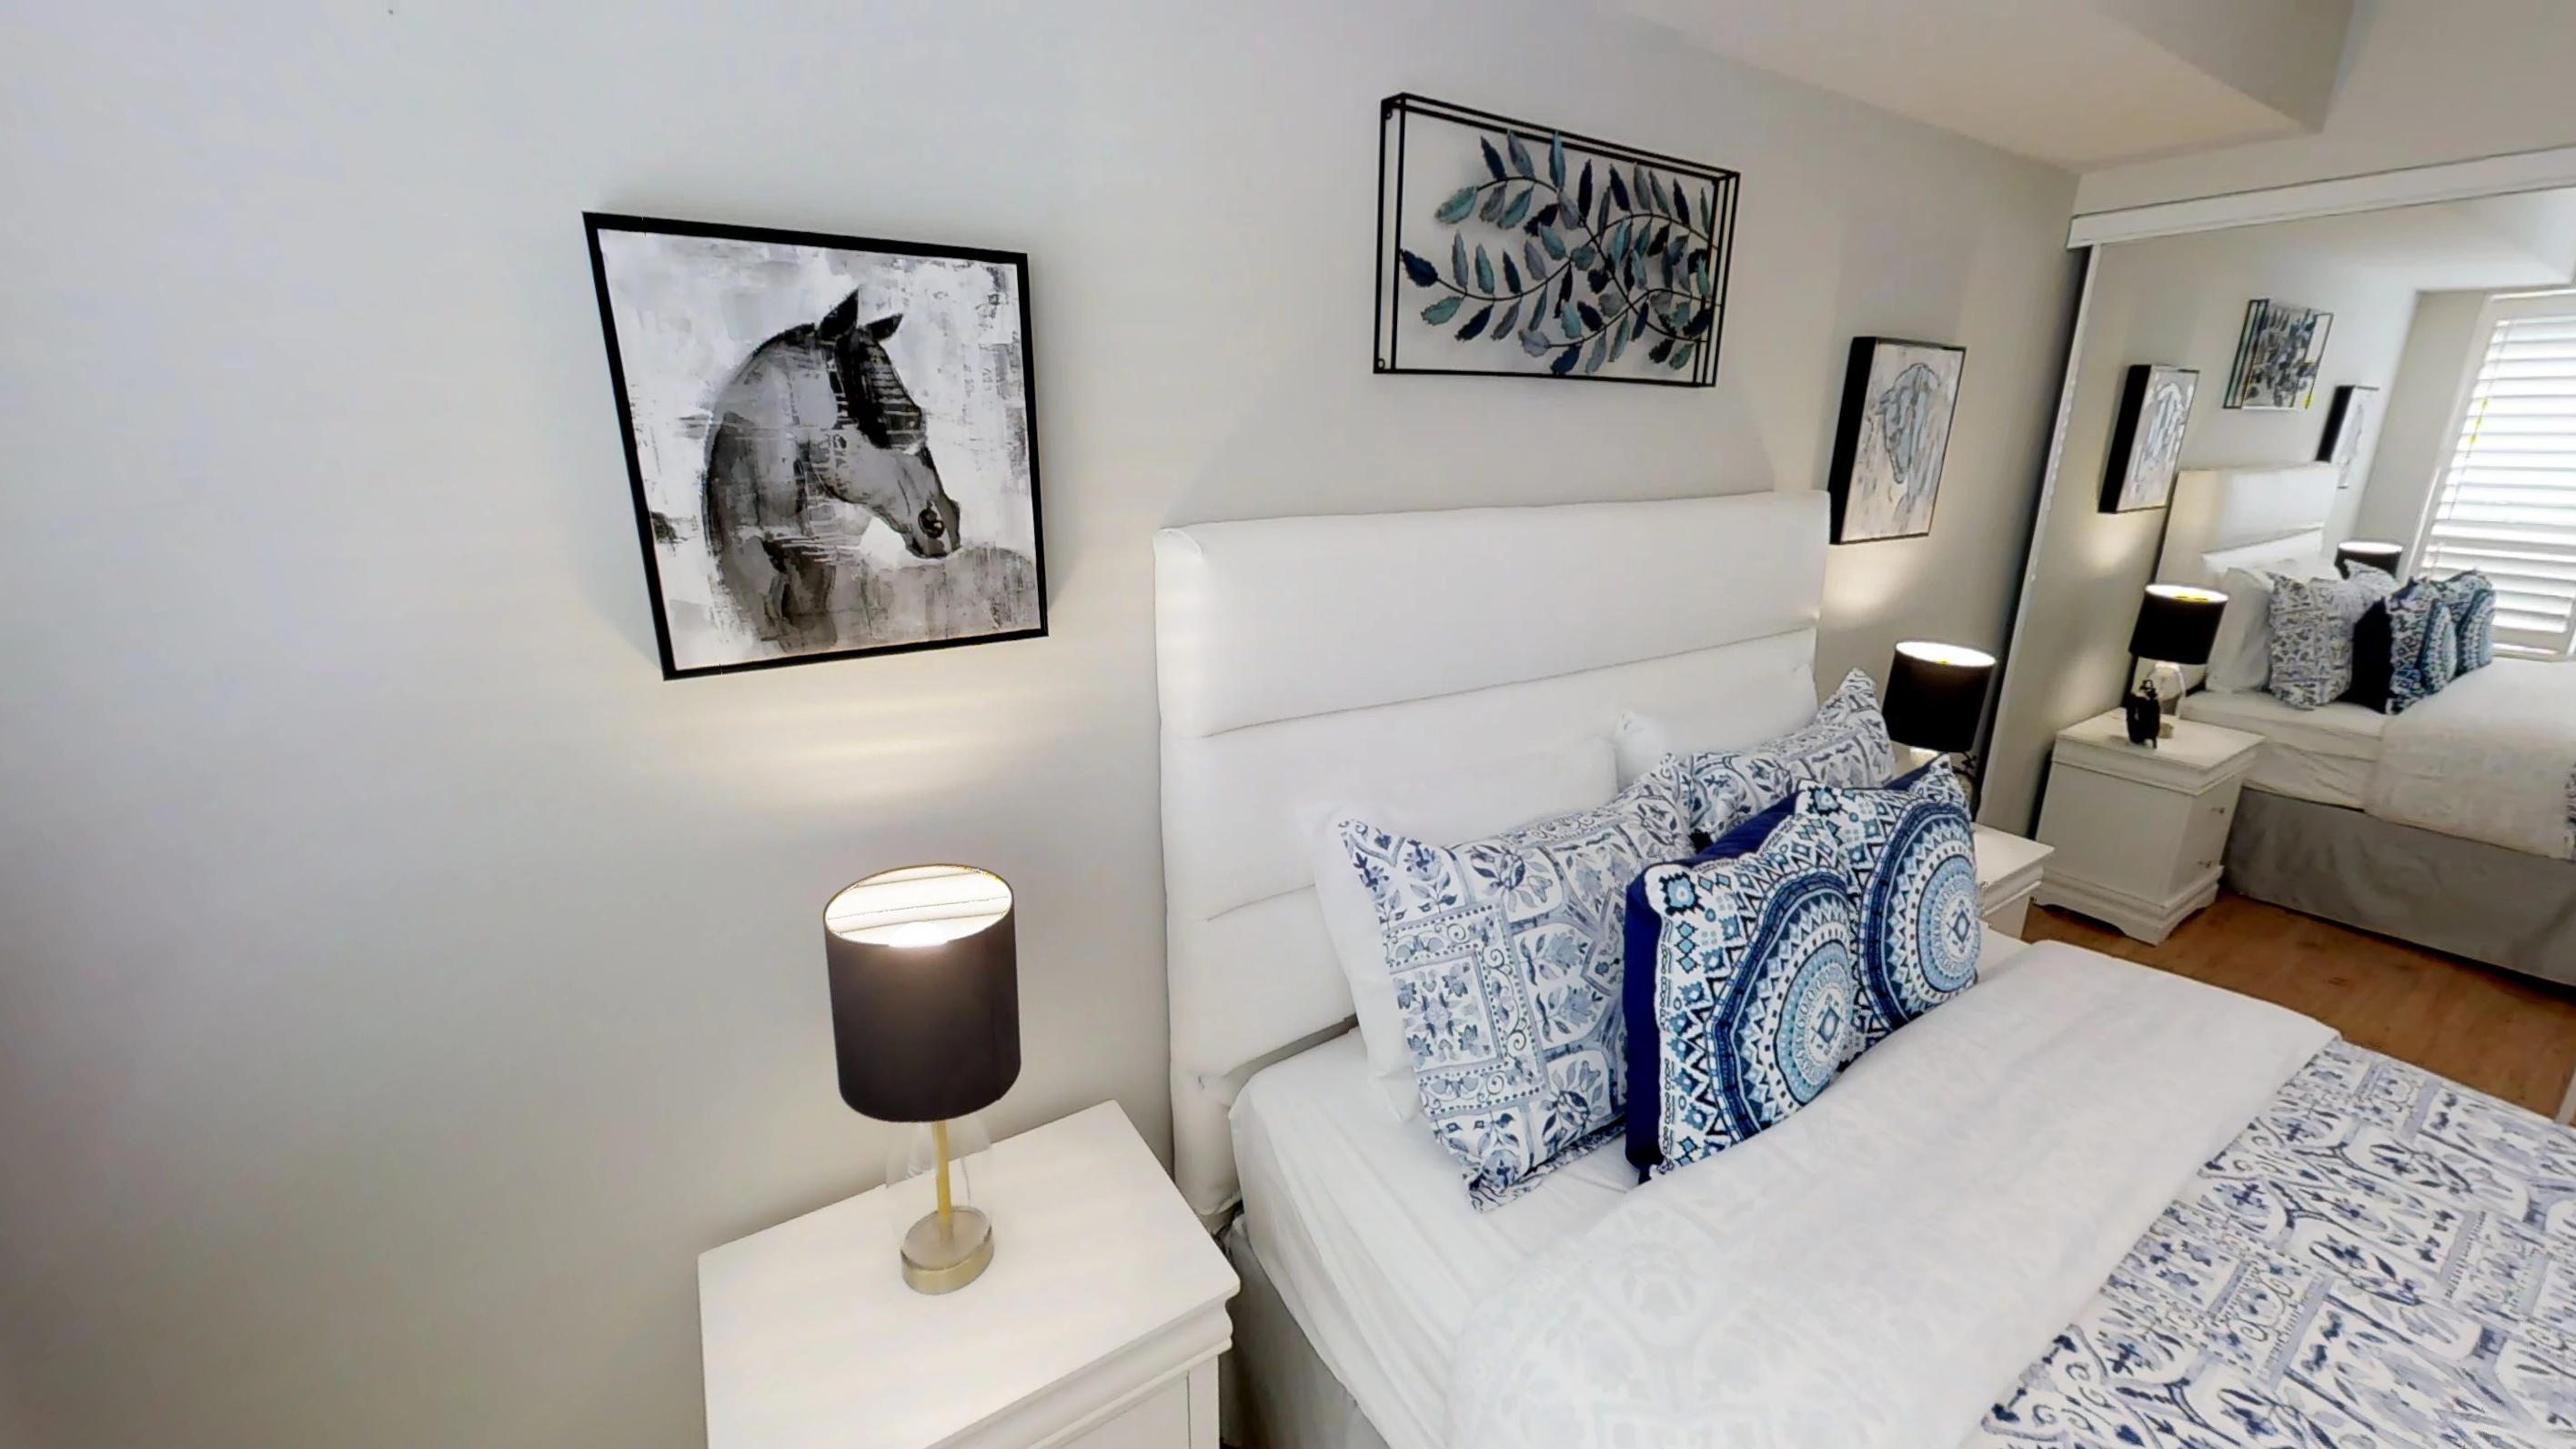 Horse art and bed in master bedroom in a fully furnished serviced apartment in downtown Toronto, near the Roger's Centre